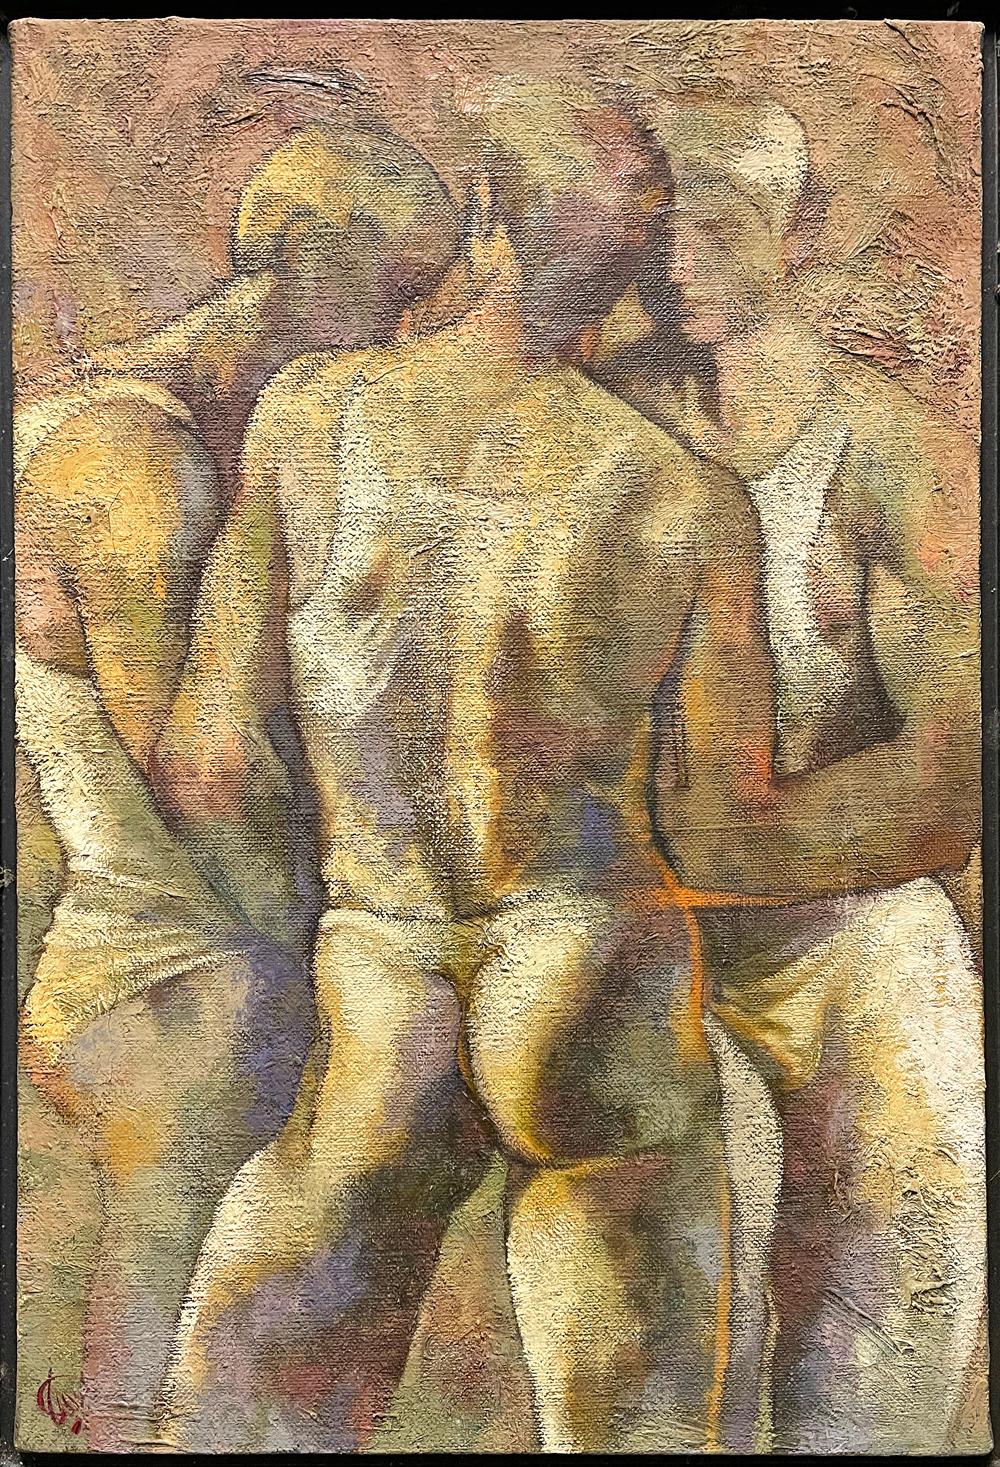 Unmistakably Mid-Century in subject matter, palette and technique, this painting by Newton McMahan depicts three powerful male dancers in quiet conversation, all captured in warm tones of honey, burnt wood and ivory (and titled it, mysteriously,